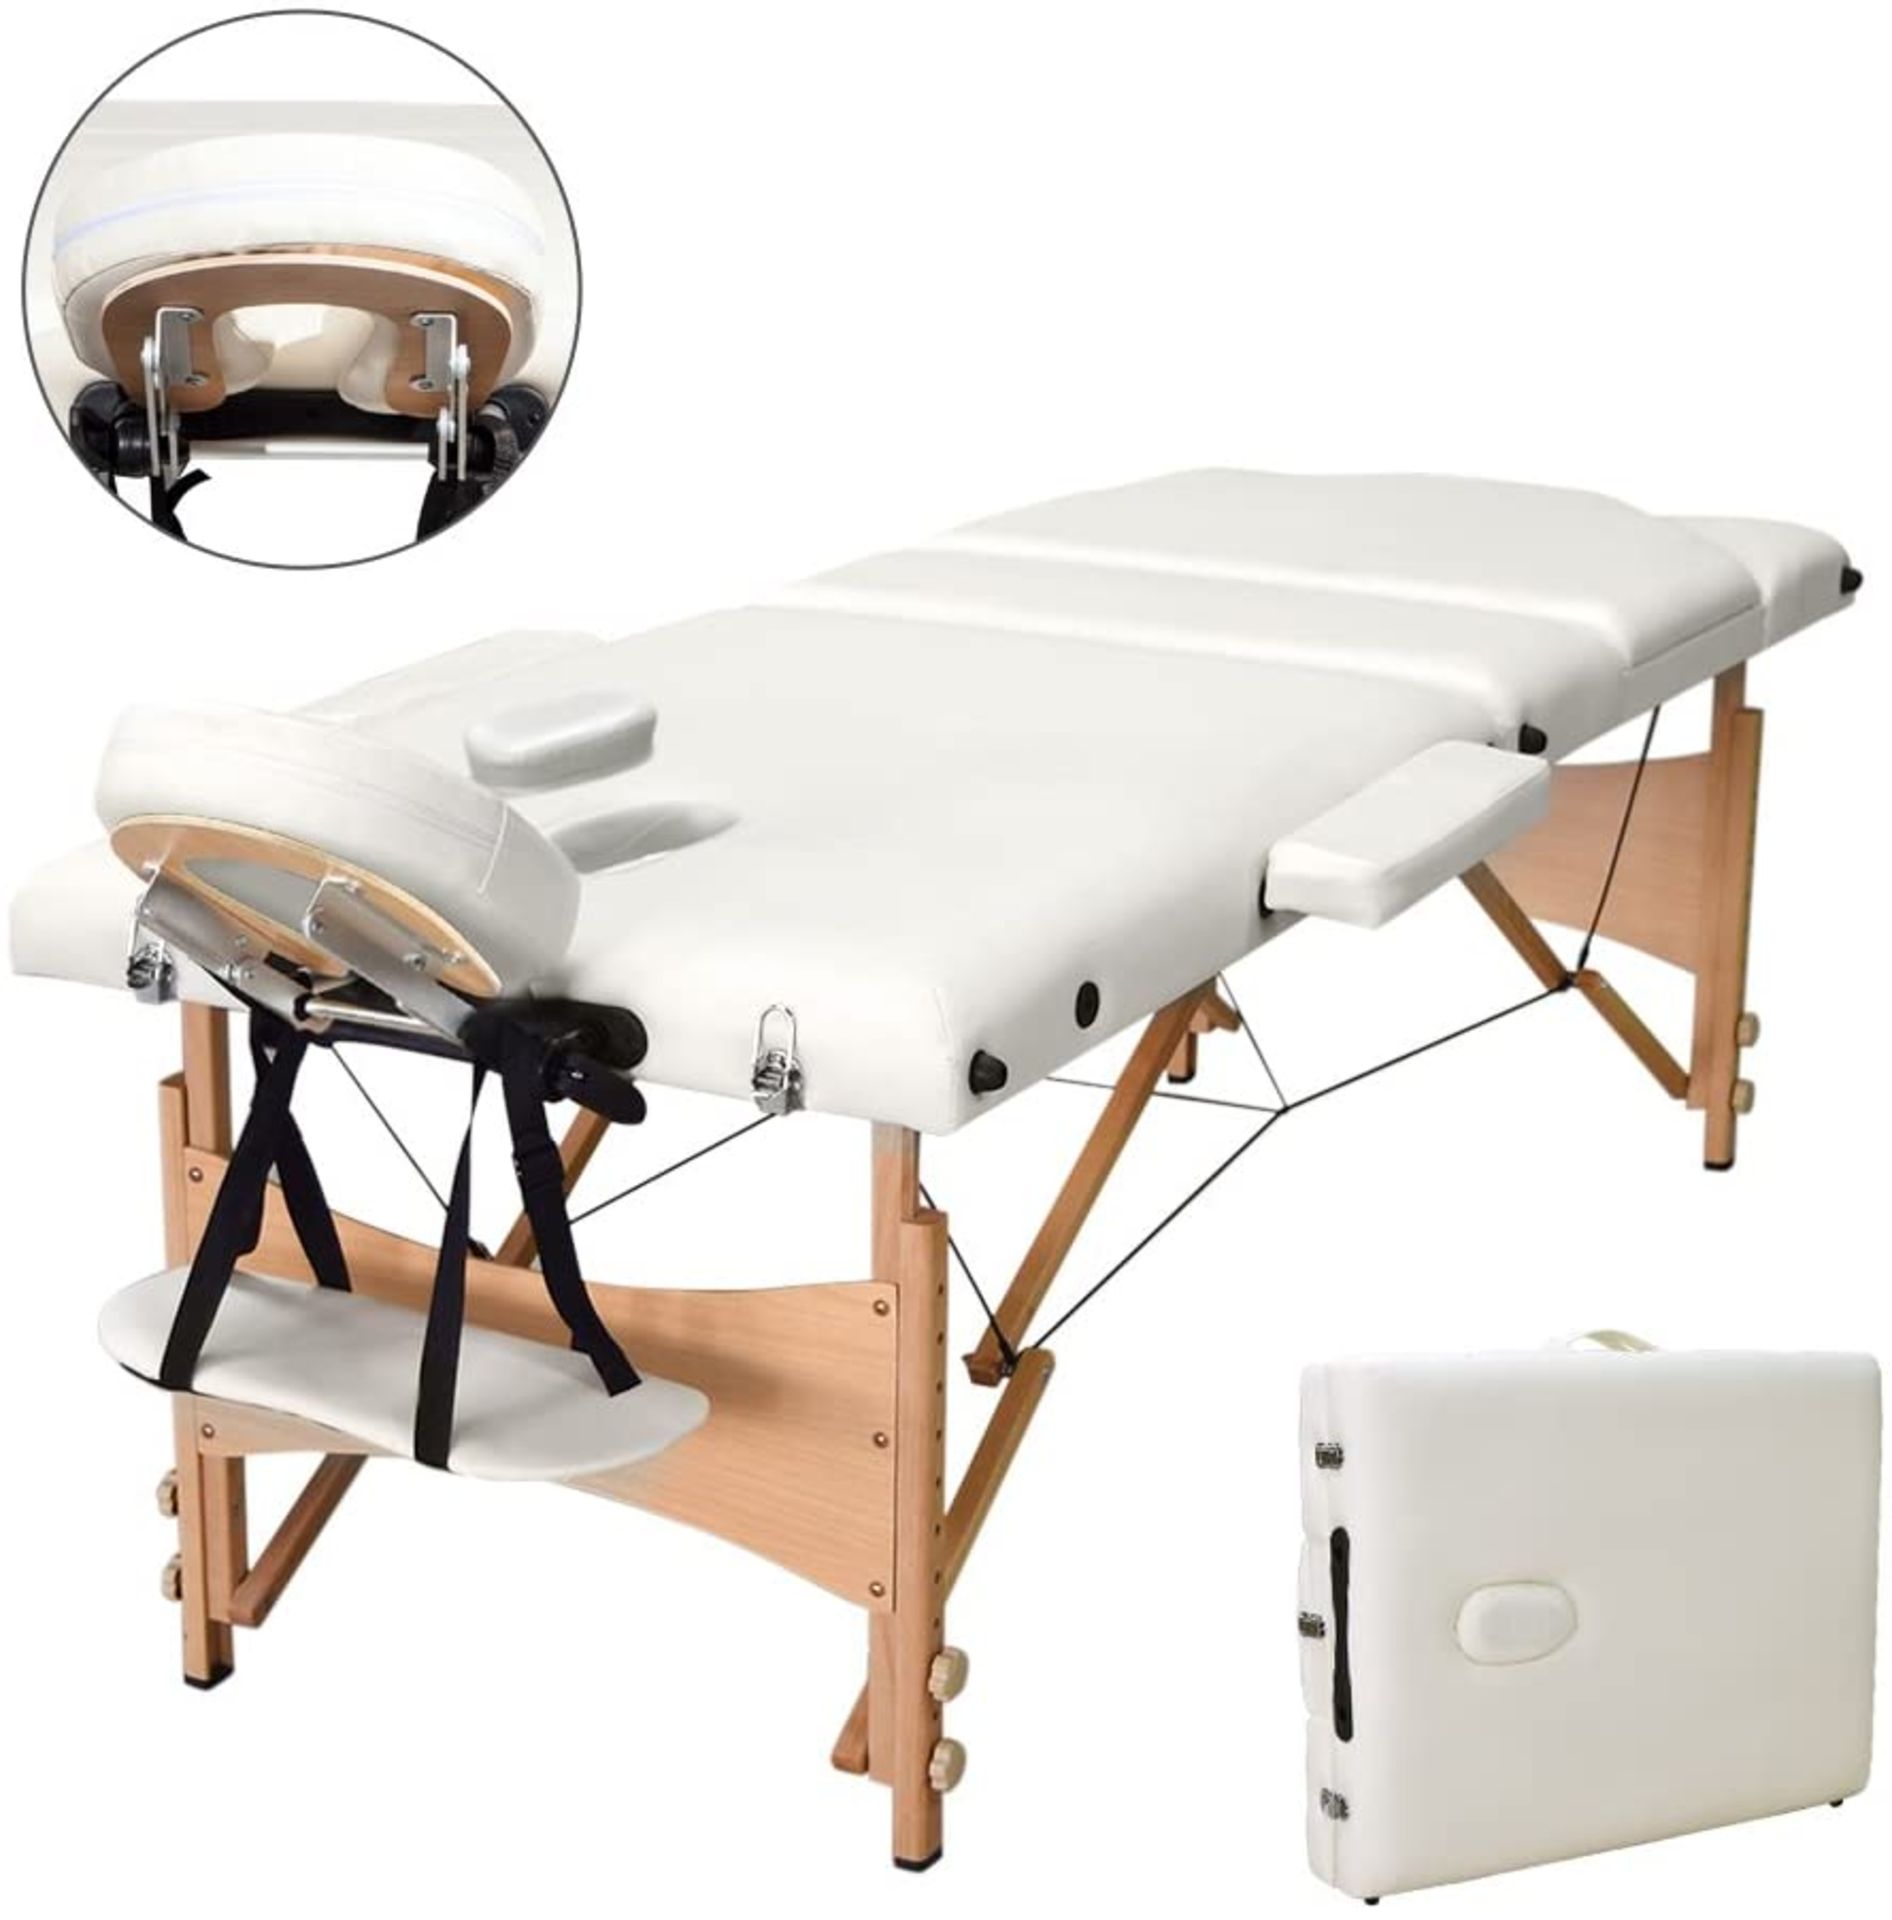 Vesgantti Portable Massage Bed Table - 3-Section Foldable Beauty Couch RRP £119.99